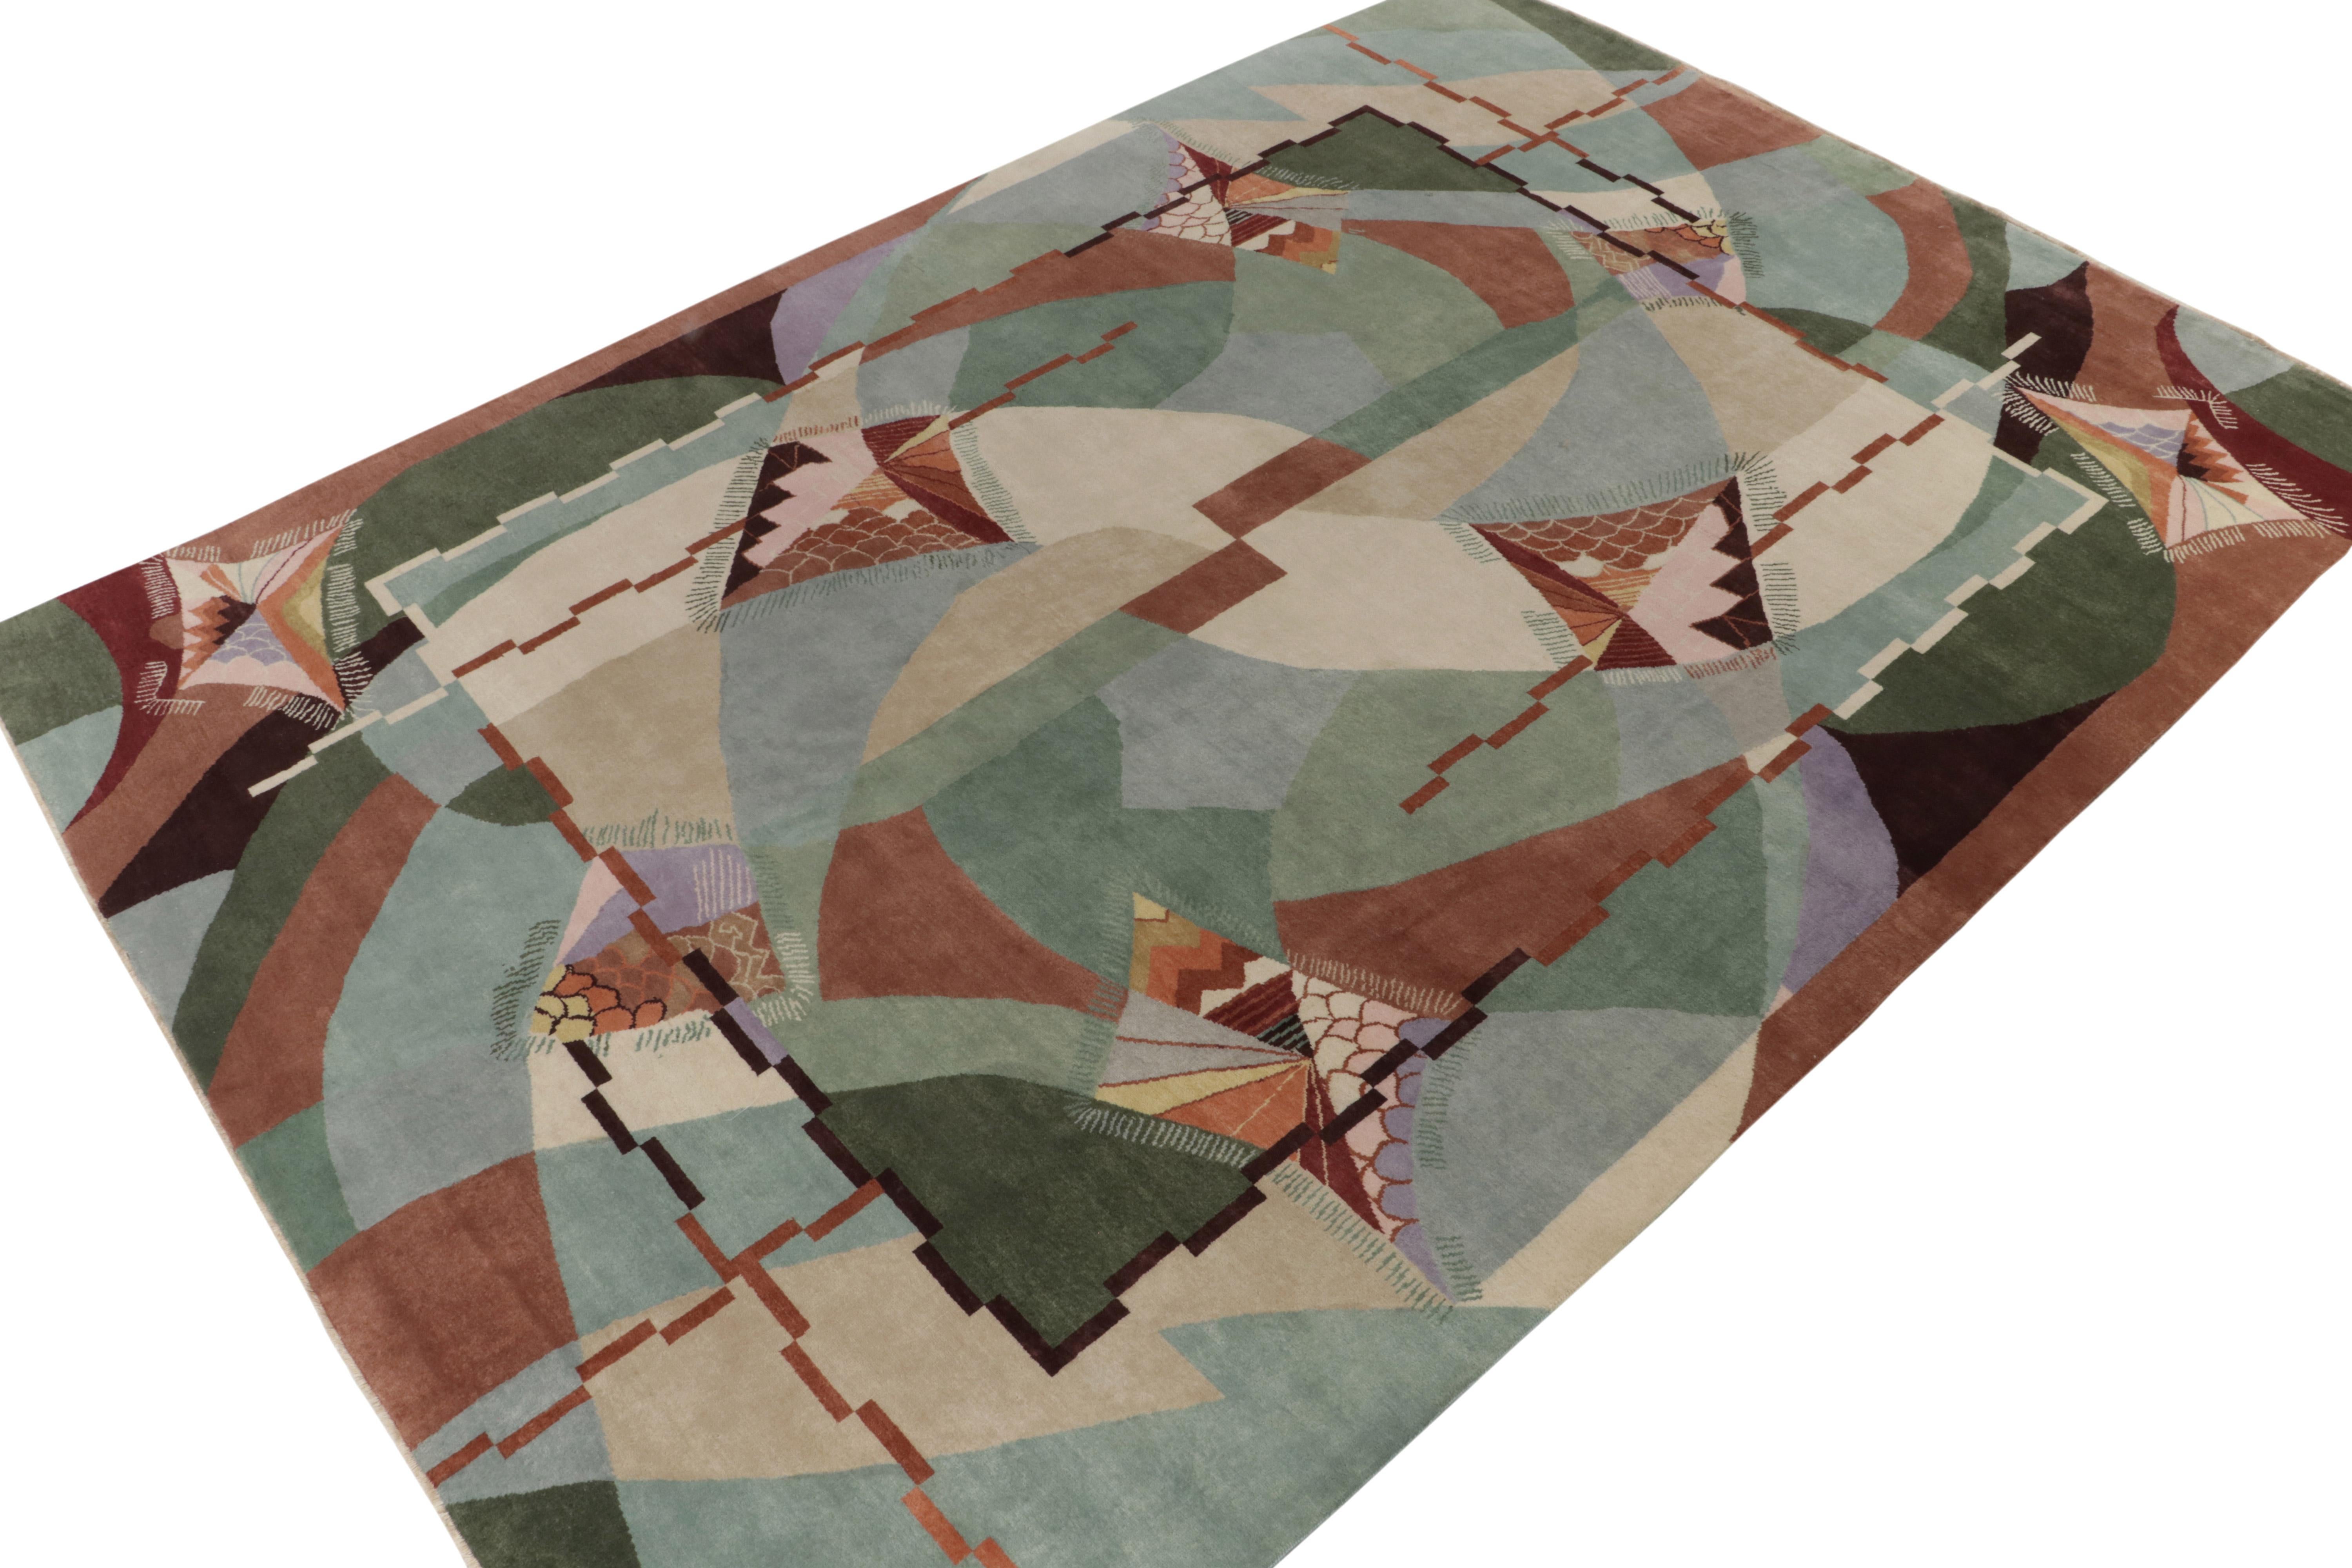 Relishing a luxurious hand-knotted wool, a 10x14 ode to Art Deco rug styles, from the titular new collection by Rug & Kilim. 

On the design: This pattern draws on a most unusual mid-century abstract expressionist take on French Deco styles of a